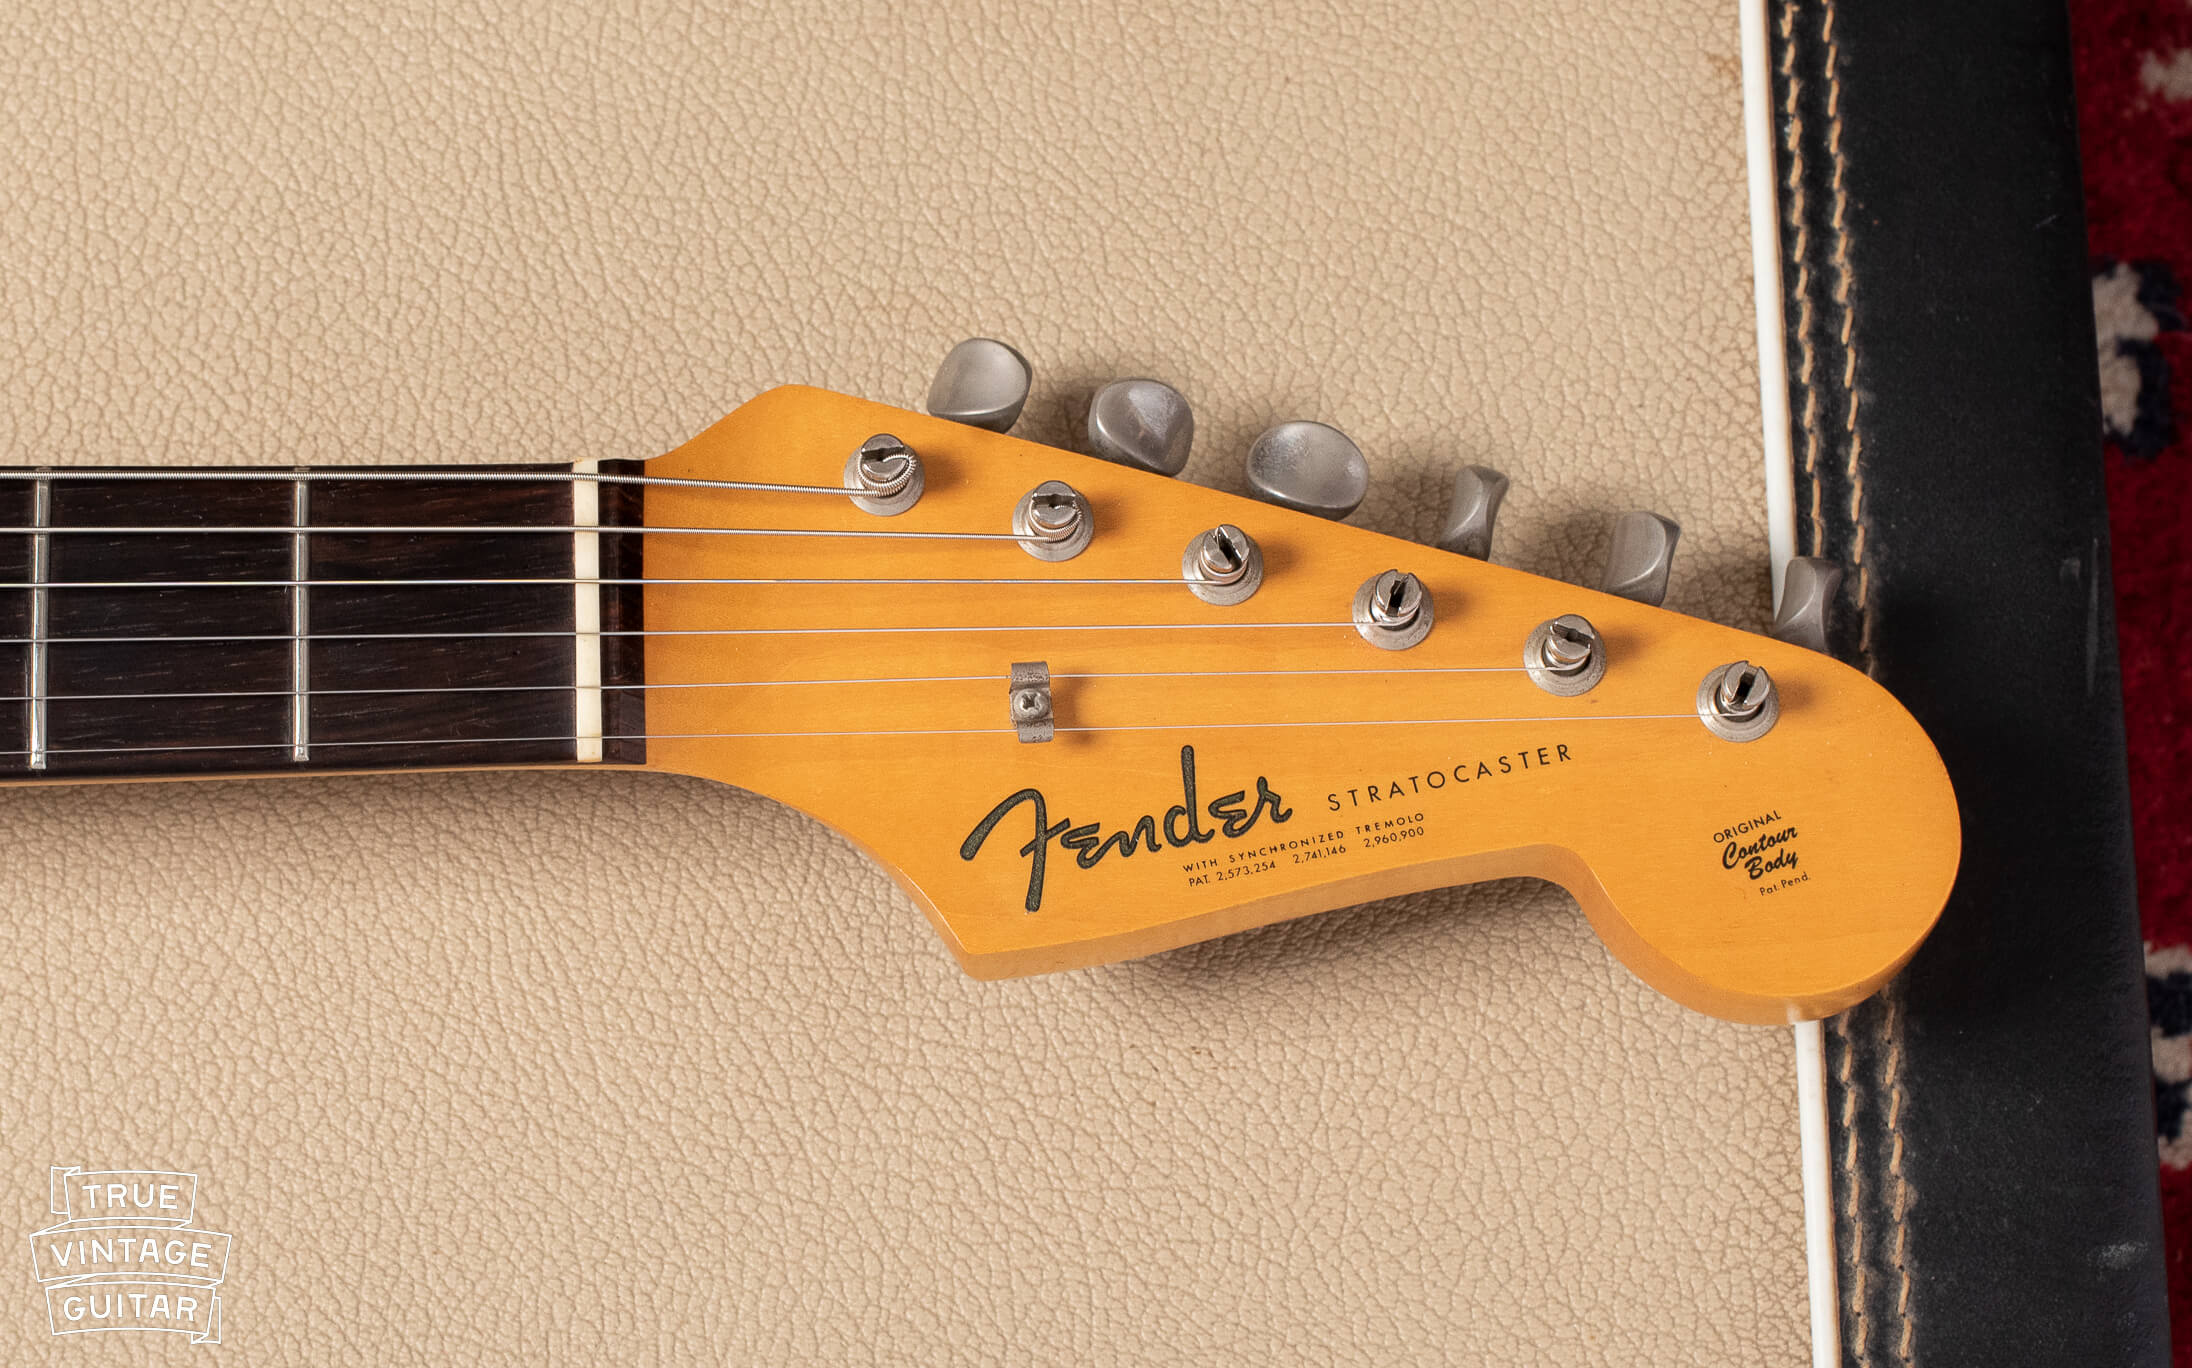 Fender Stratocaster 1964 inspection, pricing, and features